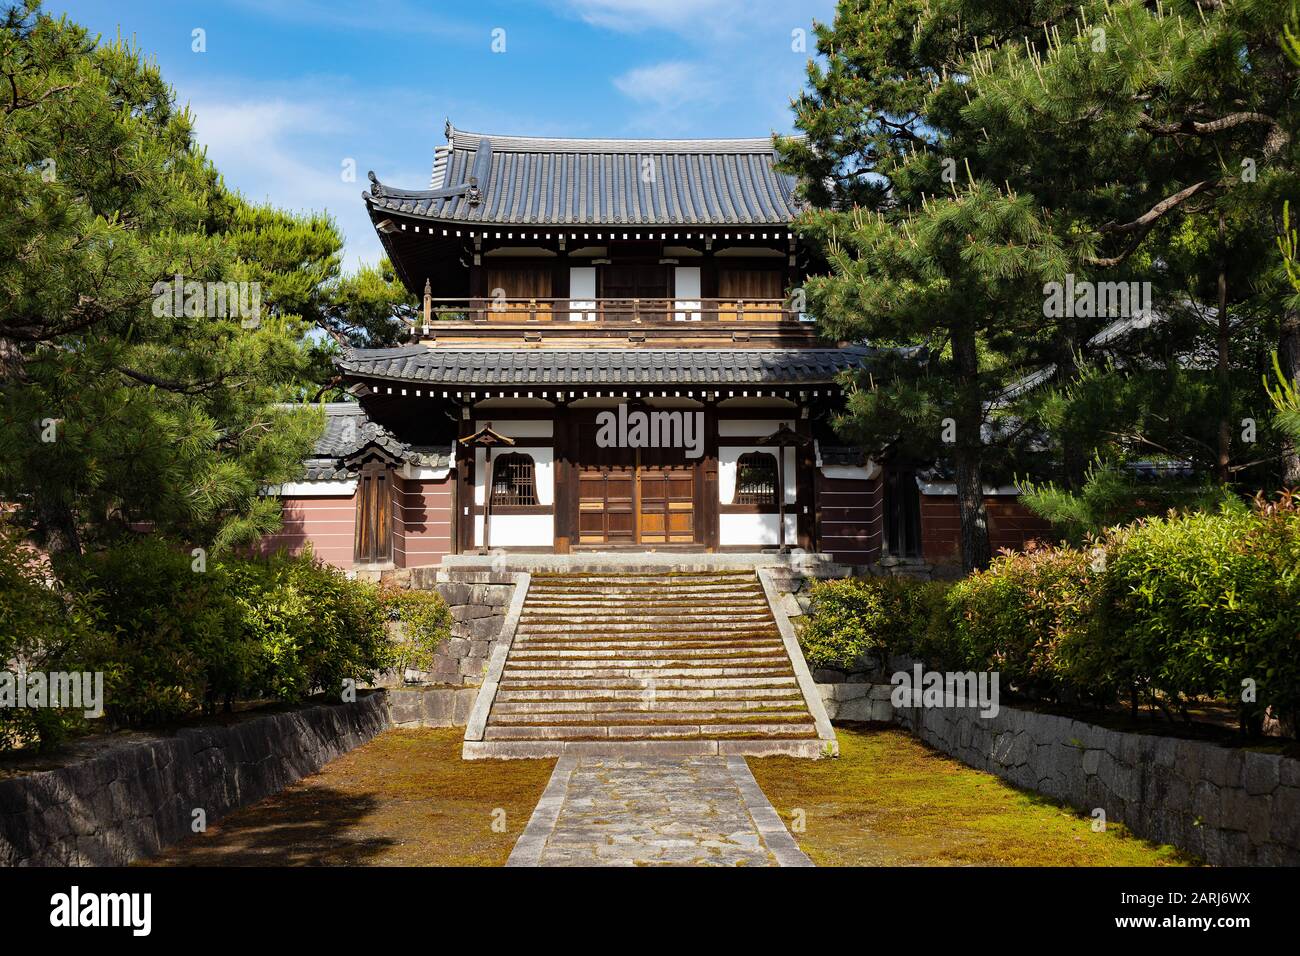 Buddhist temple against sky in city Stock Photo